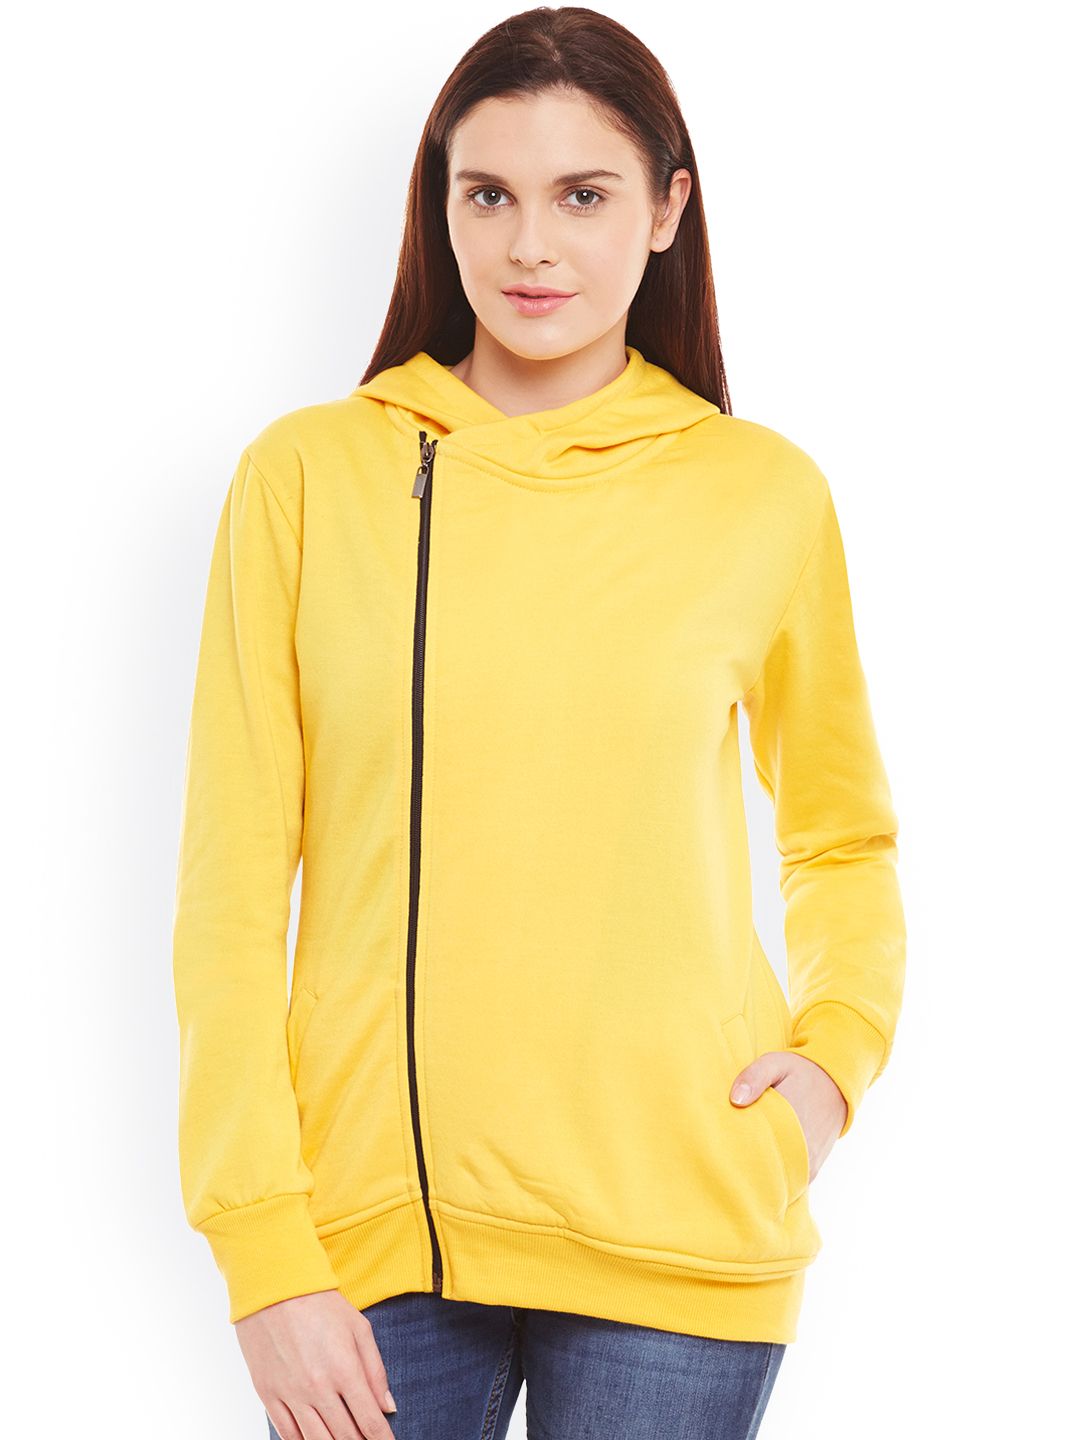 Belle Fille Yellow Hooded Jacket Price in India